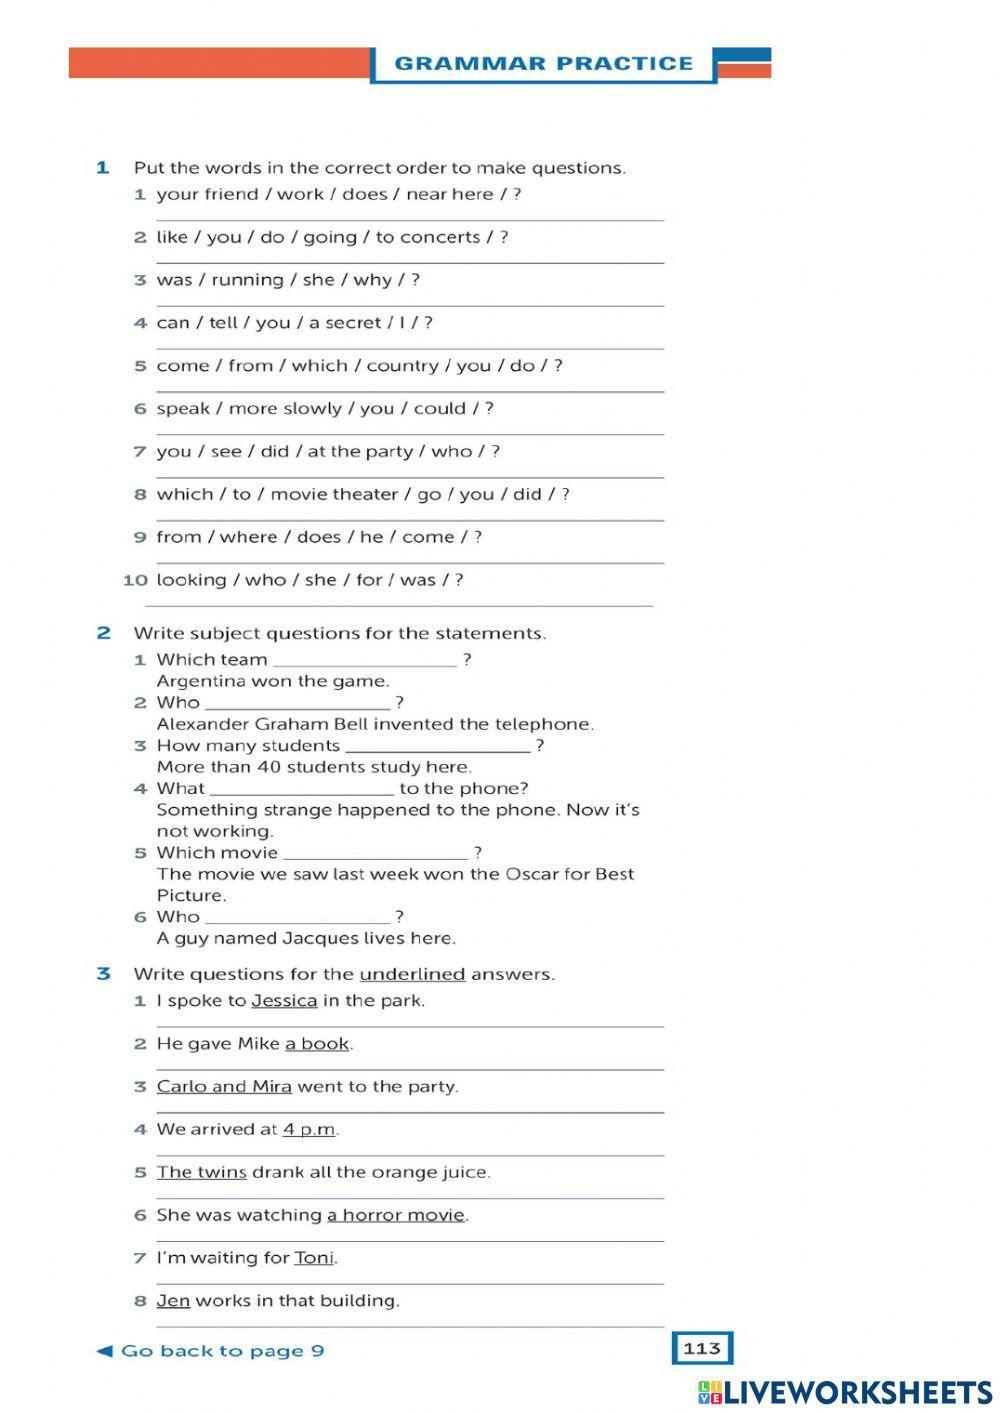 Class activity questions forms